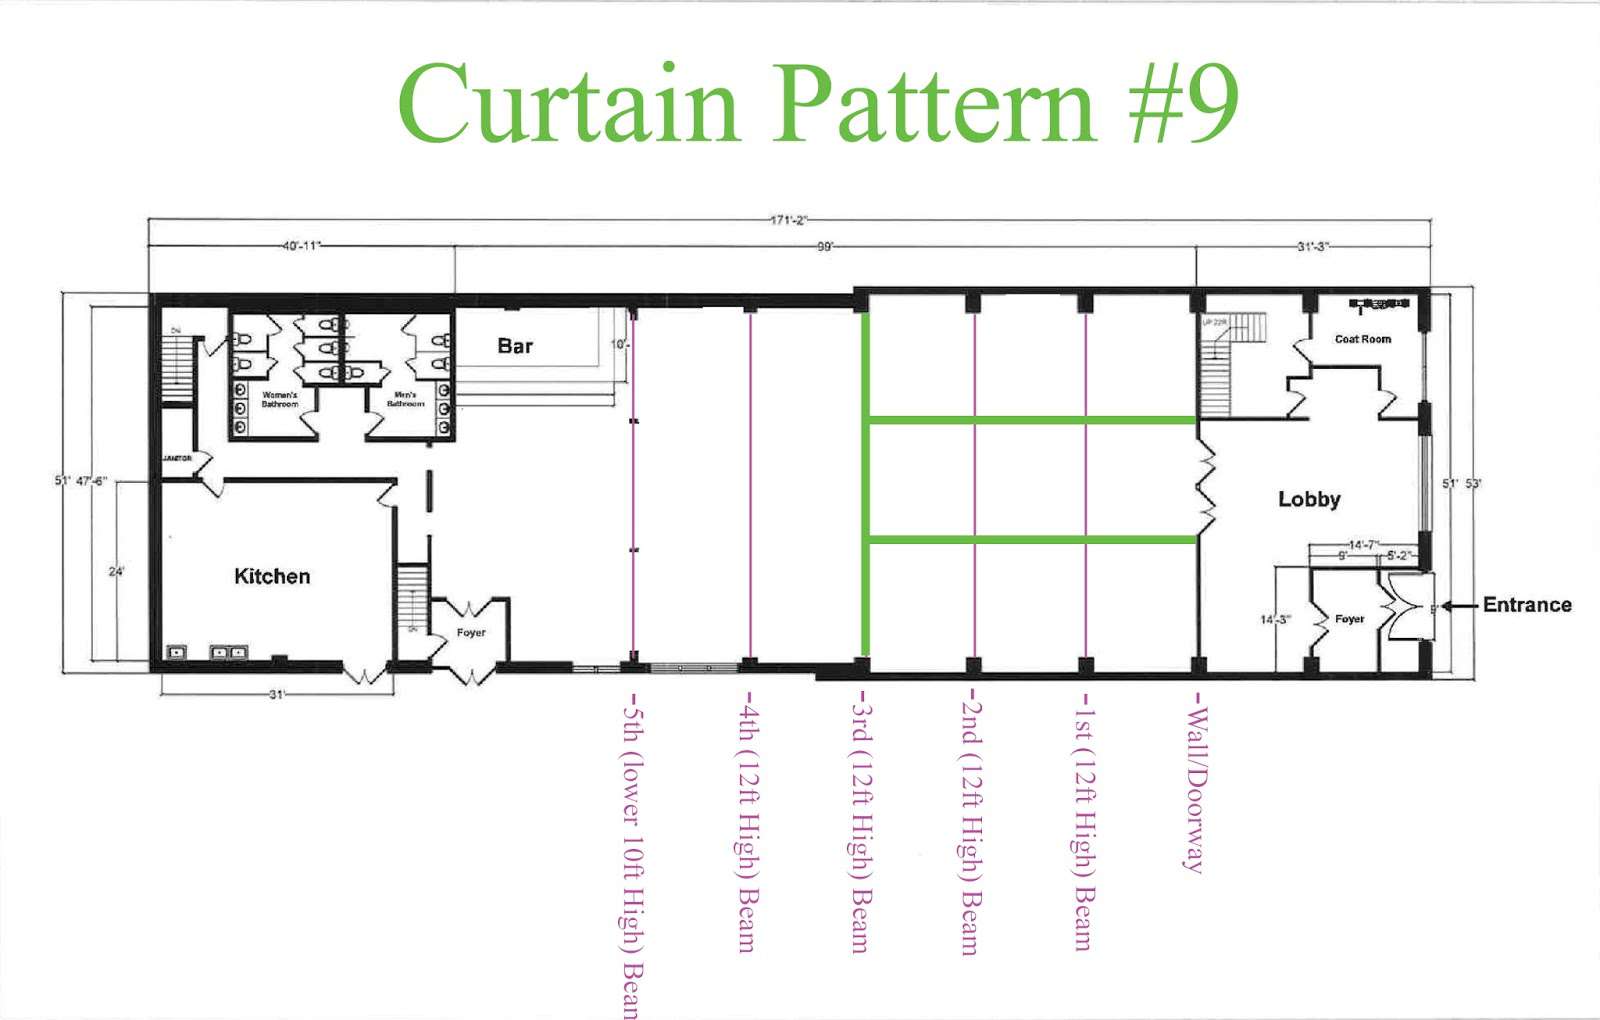 Curtains hanging across the width of the Main Room at 26 Bridge under the 3rd Beam and hanging the length of the room between 3rd Bean and Entrance wall on the Bar-Side of The Main Room and NON-Bar-Side of The Main Room.